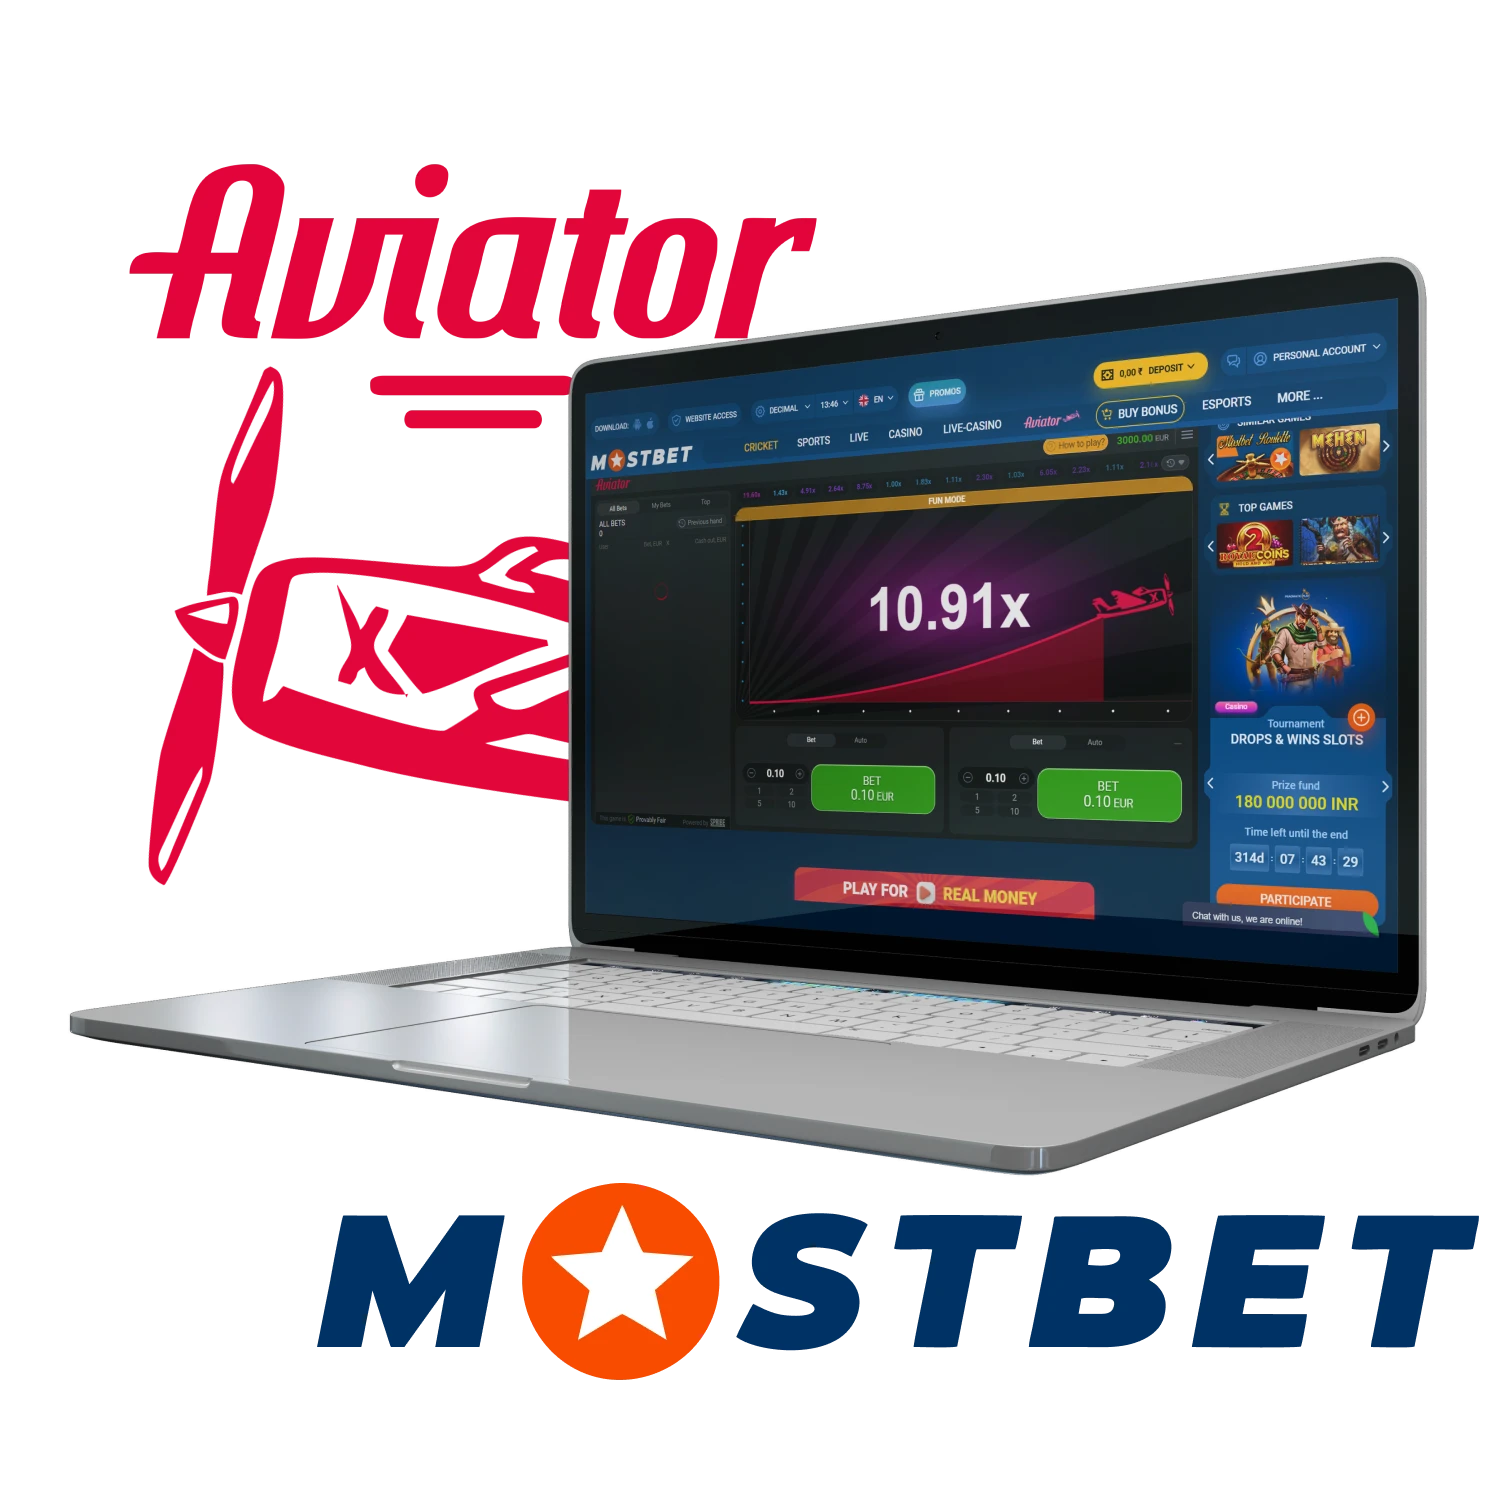 How I Got Started With Casino Mostbet in the Netherlands